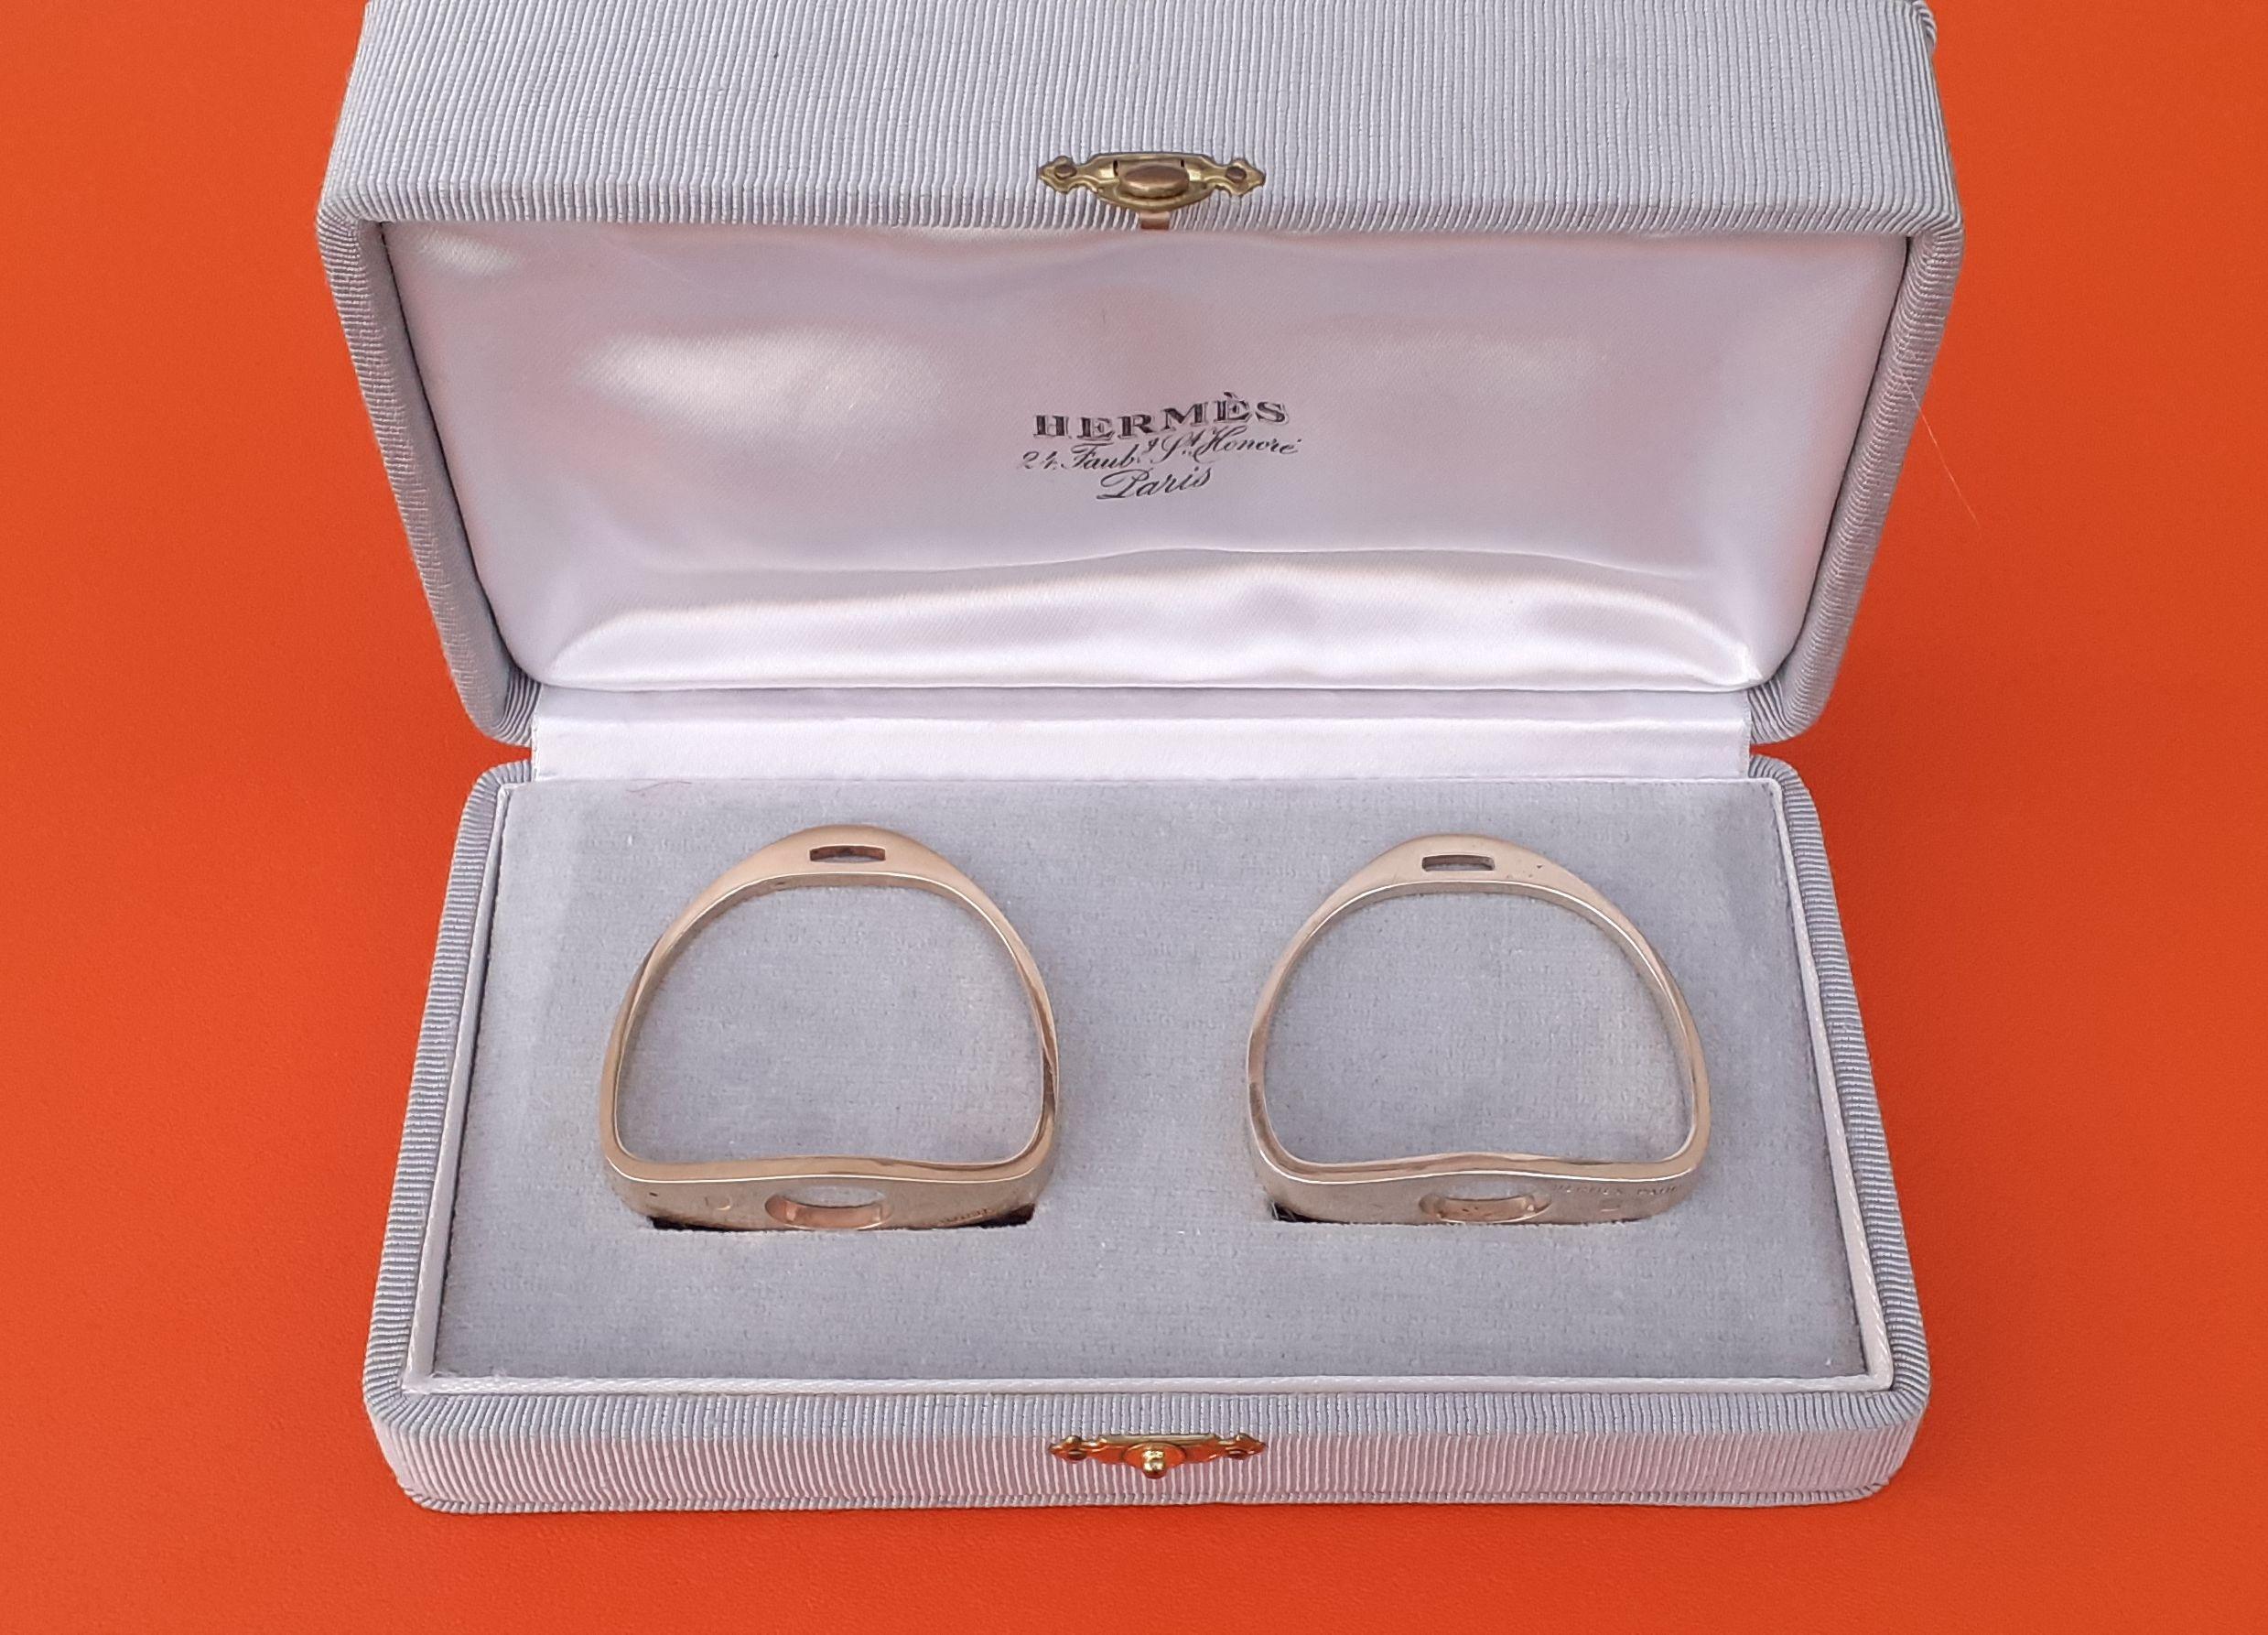 Gorgeous and Rare Authentic Hermès Napkin Rings

Set of 2 

In shape of Stirrups, horse riding theme

Vintage items

Made of silver-gilt (silver covered with gold) / vermeil

Colorway: golden

